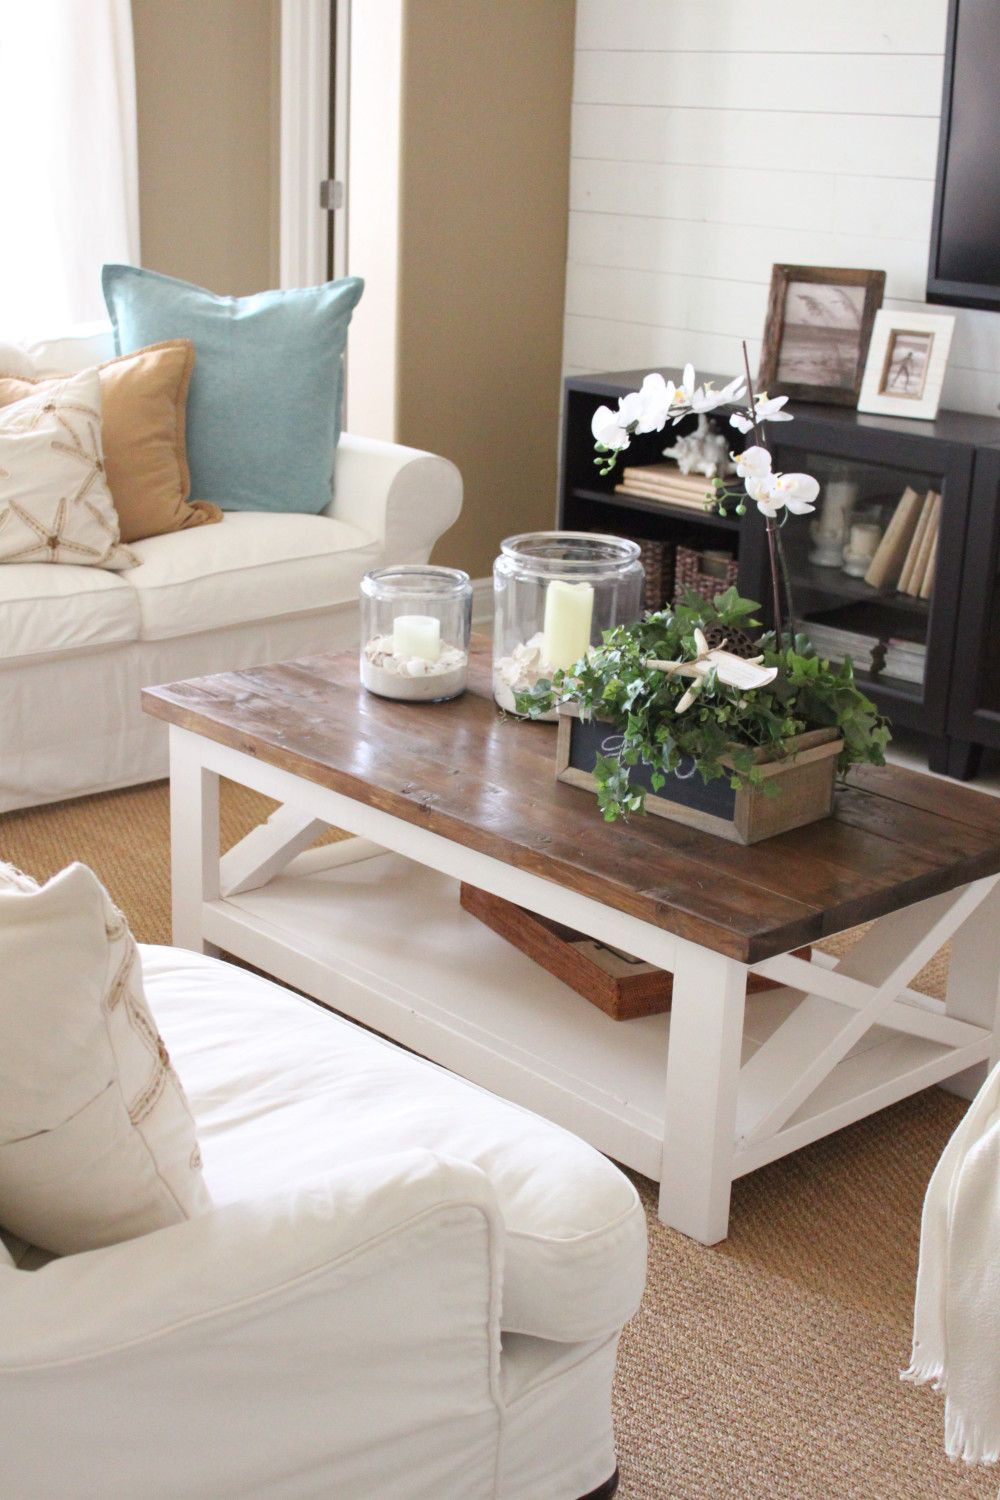 Living Room End Table Ideas
 Pin by Rachel Pannell on Living room